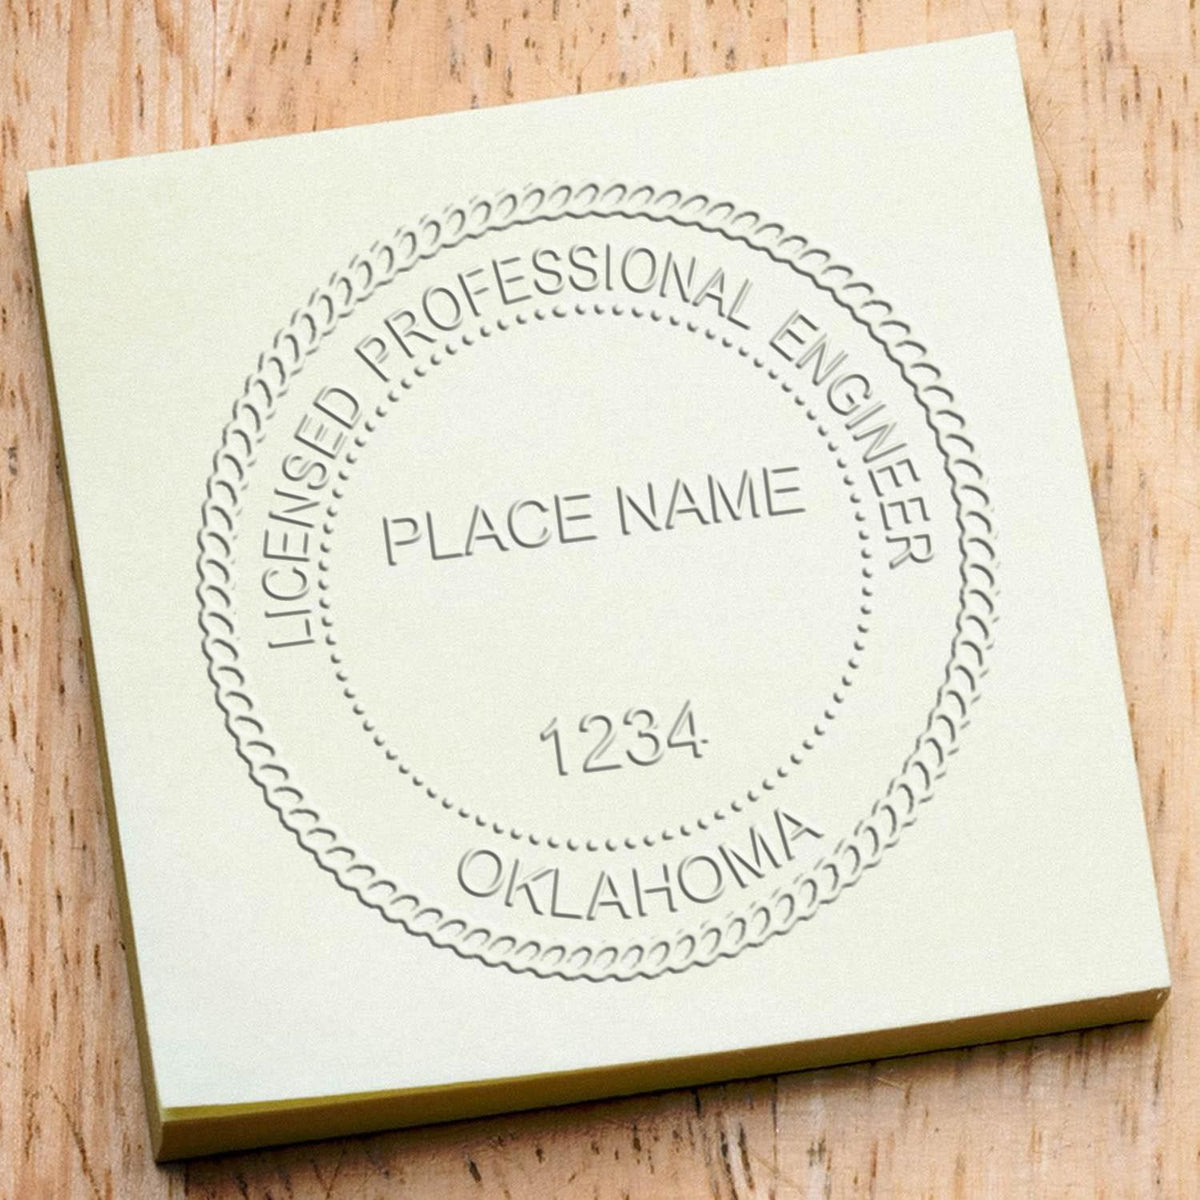 A stamped impression of the Soft Oklahoma Professional Engineer Seal in this stylish lifestyle photo, setting the tone for a unique and personalized product.